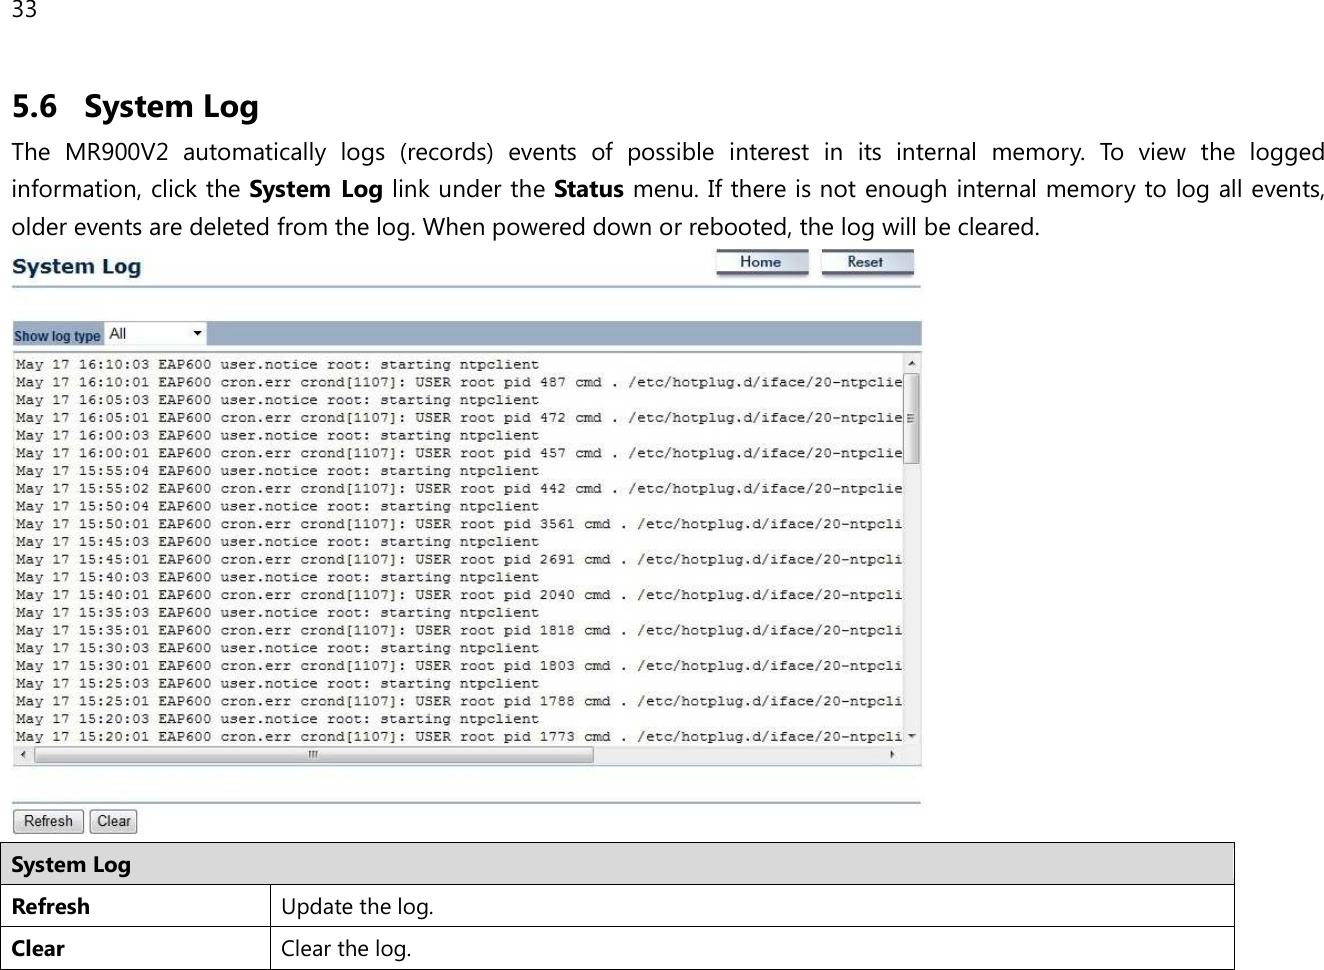 33  5.6 System Log The  MR900V2  automatically  logs  (records)  events  of  possible  interest  in  its  internal  memory.  To  view  the  logged information, click the System  Log link under the Status menu. If there is not enough internal memory to log all events, older events are deleted from the log. When powered down or rebooted, the log will be cleared.  System Log Refresh Update the log. Clear Clear the log.  